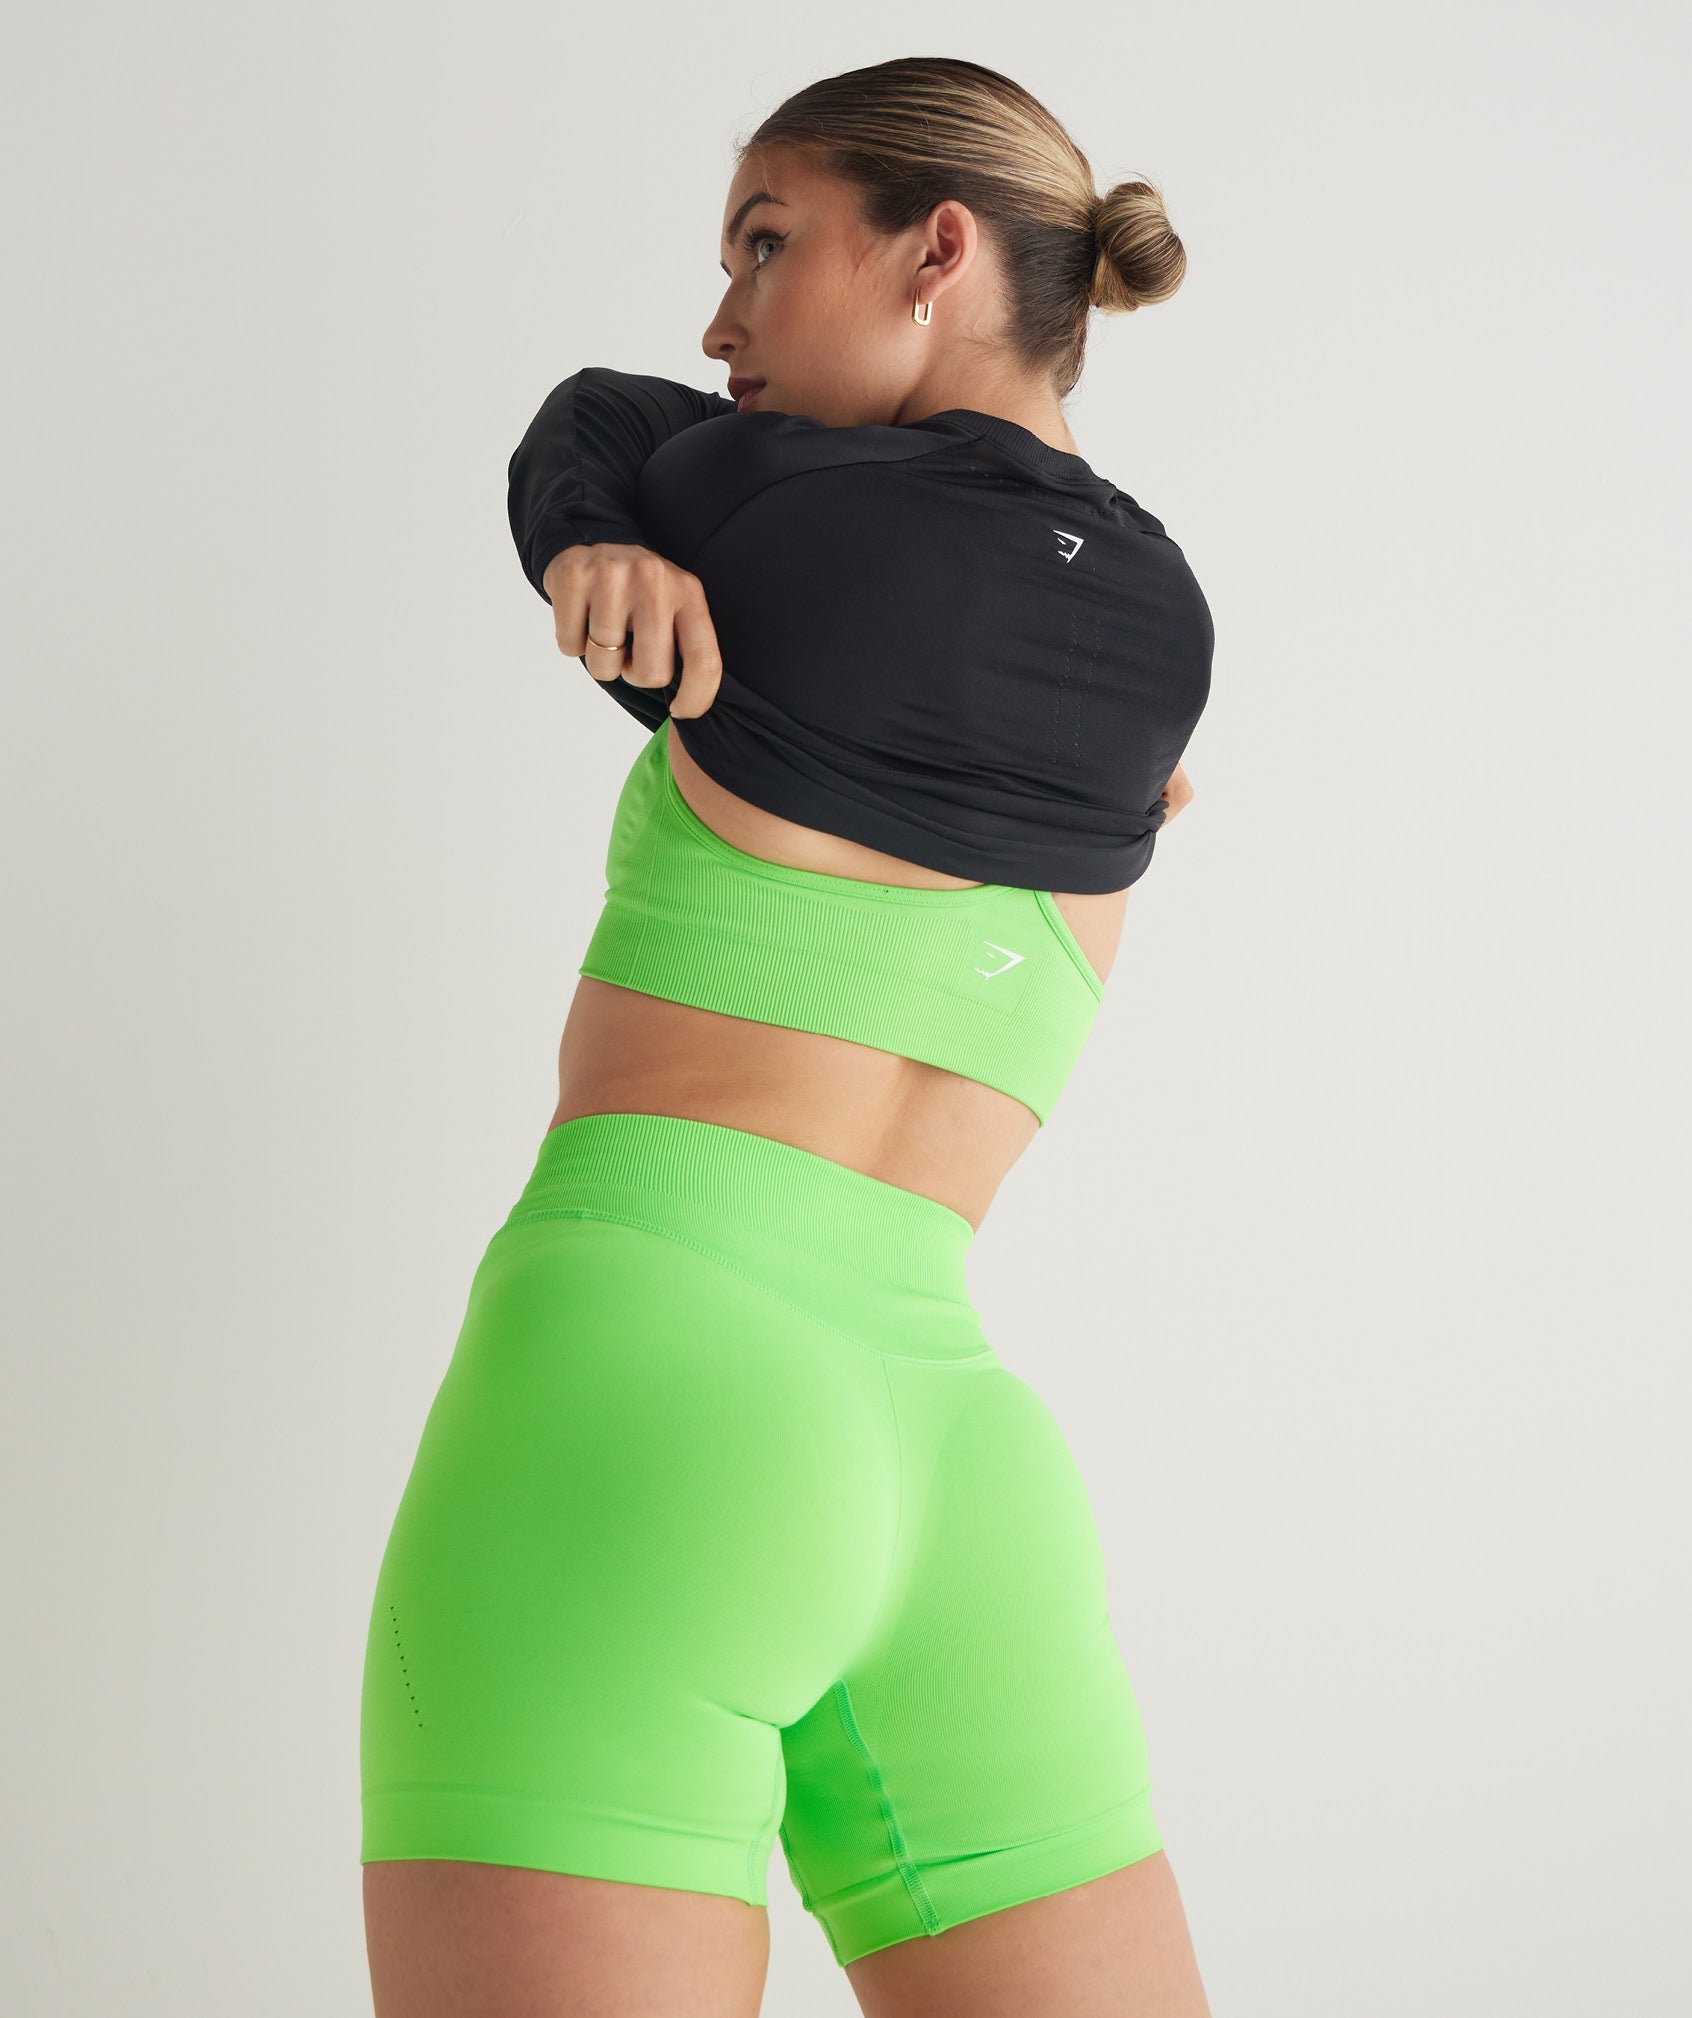 Sweat Seamless Sculpt Shorts in Fluo Lime - view 5